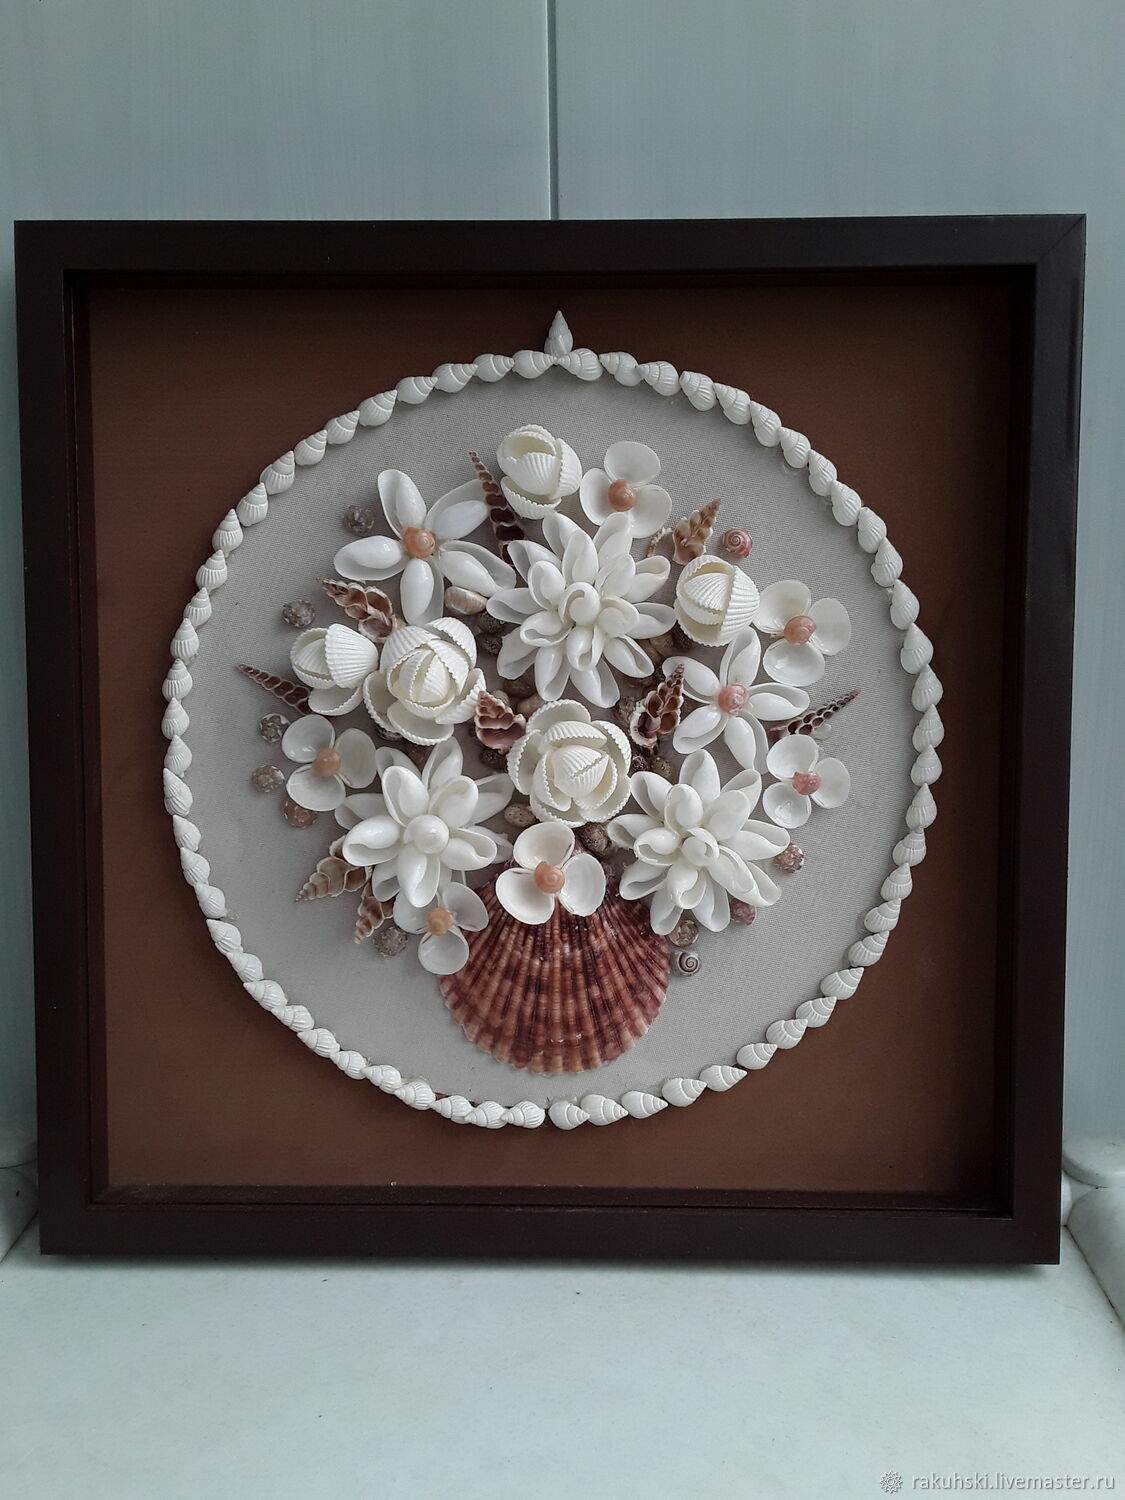 A three-dimensional picture of seashells 'Favorite'', Pictures, Magnitogorsk,  Фото №1